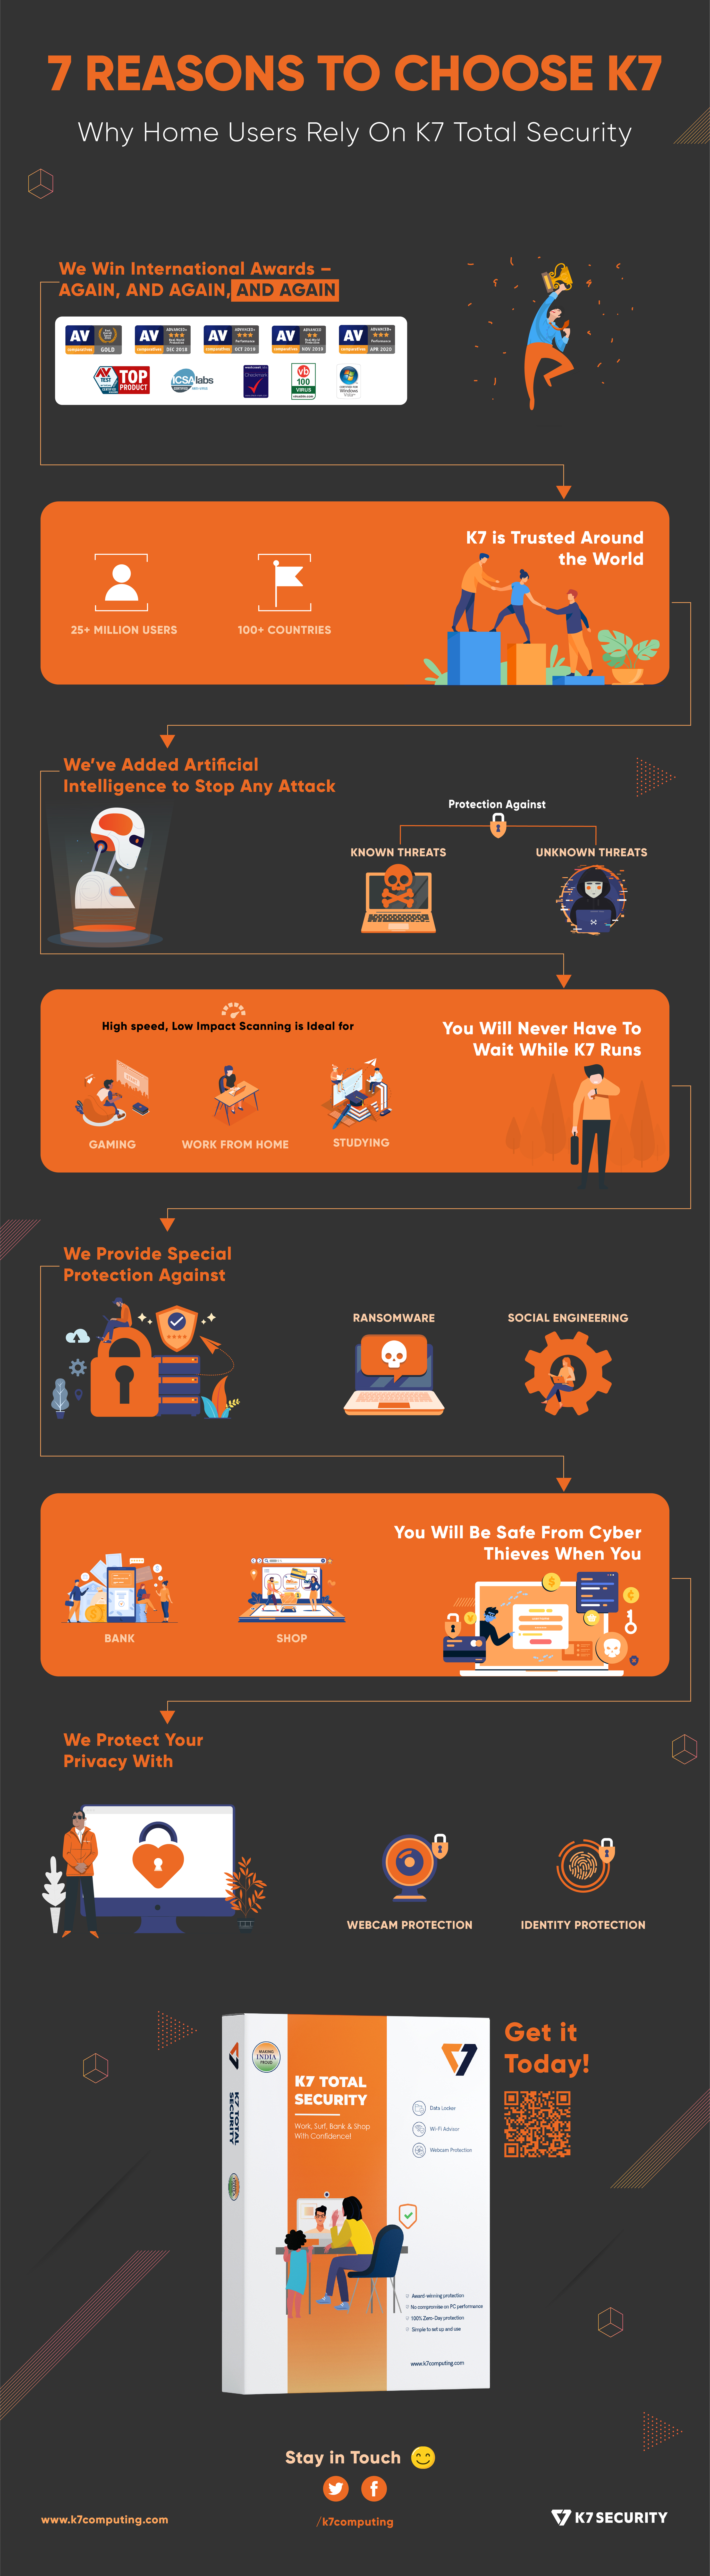 Cybersecurity Infographpic for K7 Home Users - 7 Reasons to Choose K7 Total Security